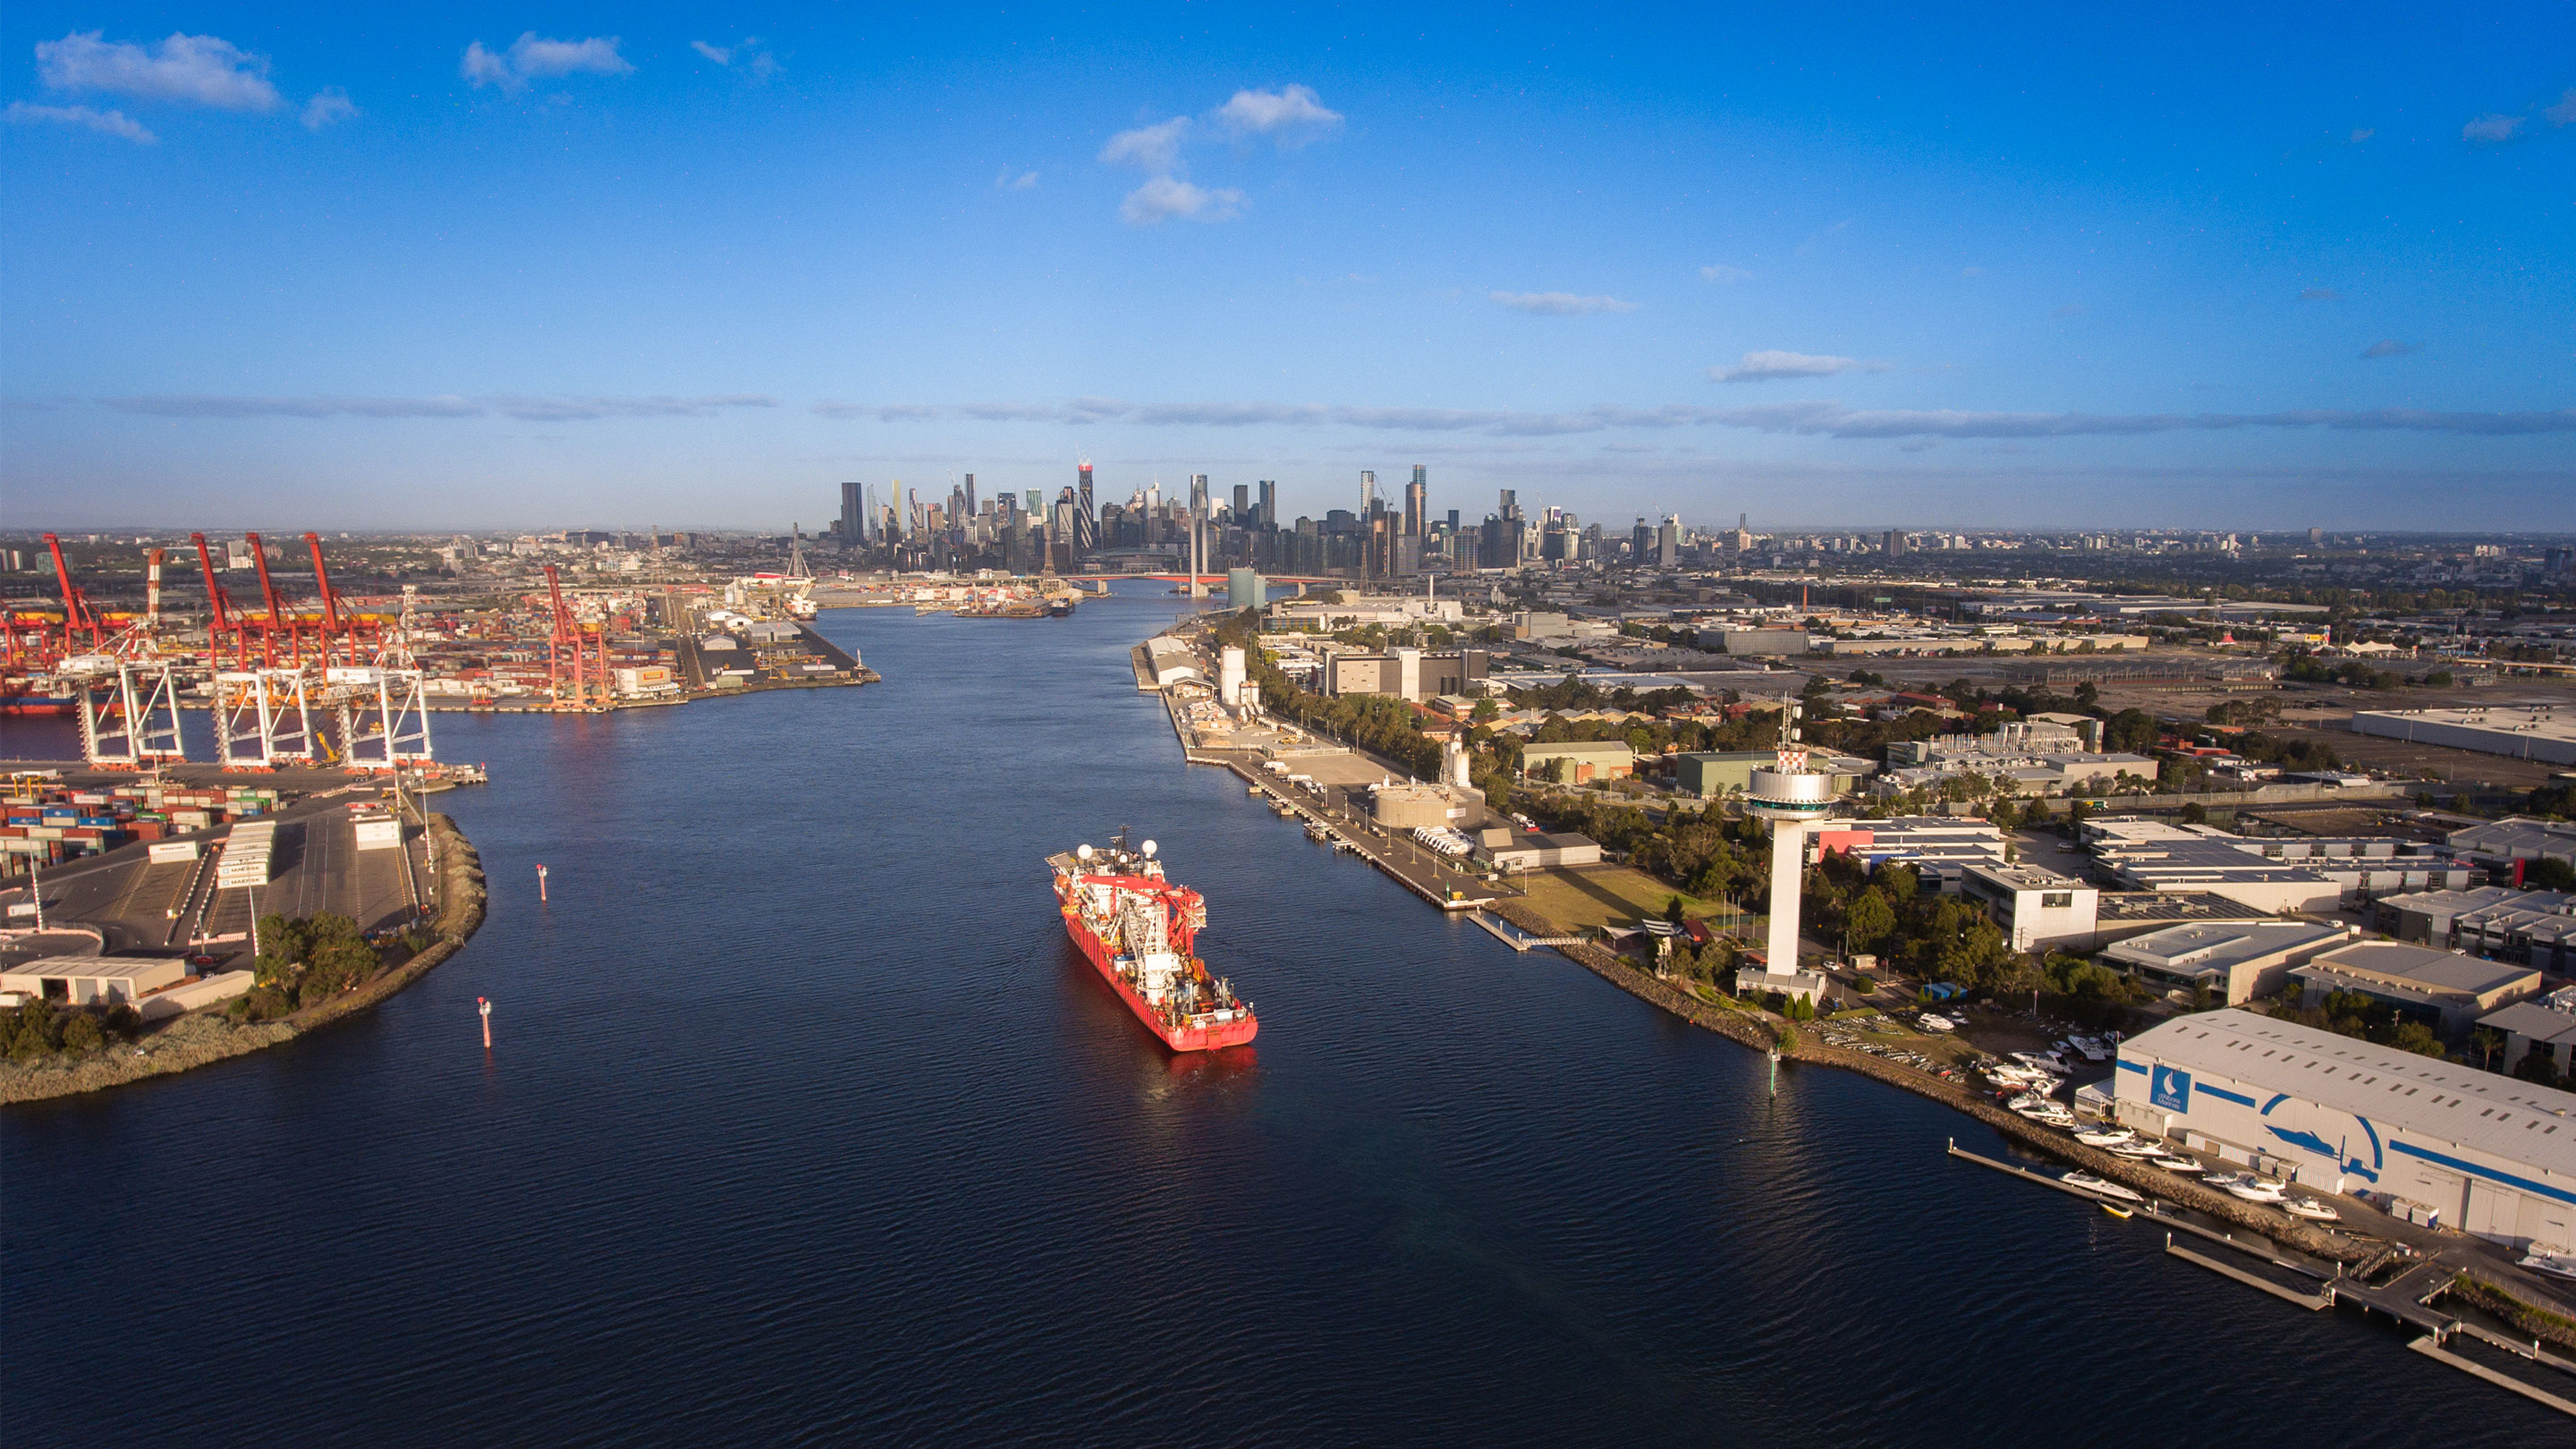 The Subsea 7 Seven Eagle arriving in the Port of Melbourne